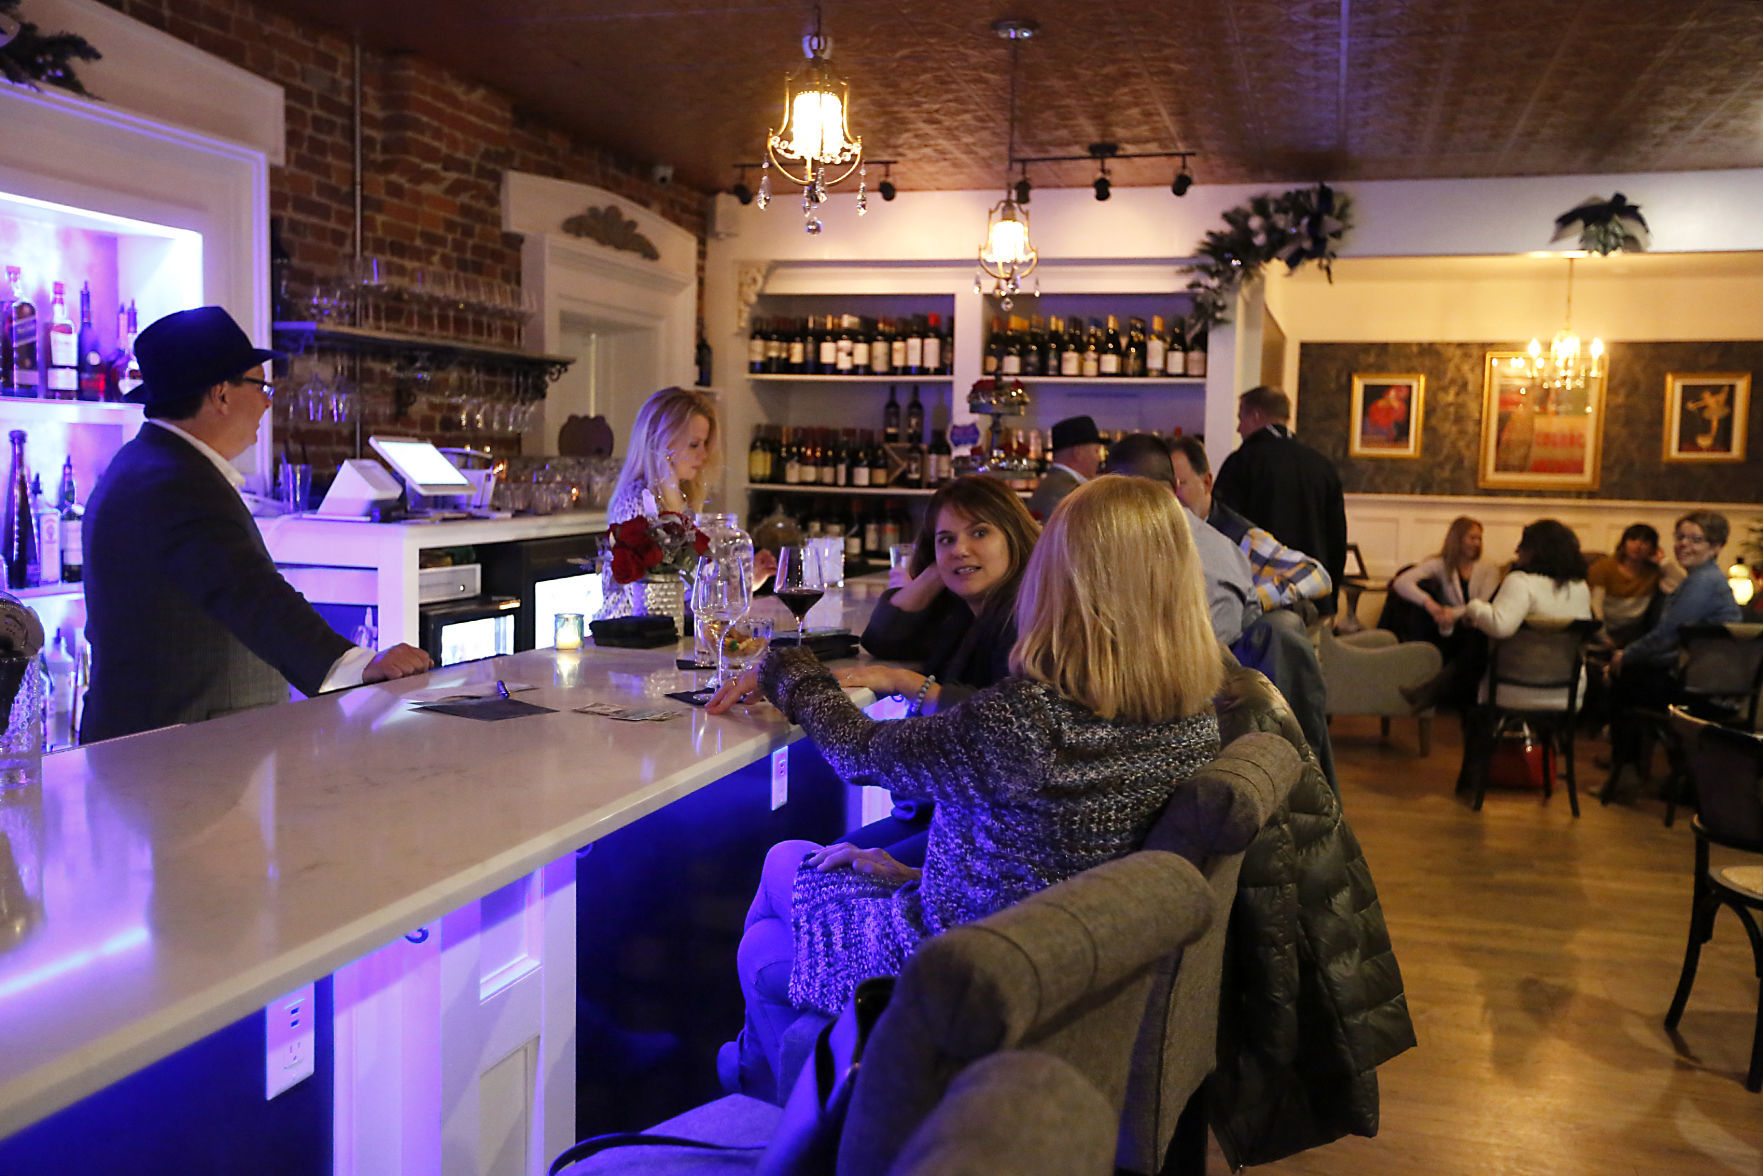 The Wicked Dame Wine + Bar offers a quiet and homey feel to West First Street. PHOTO CREDIT: EILEEN MESLAR